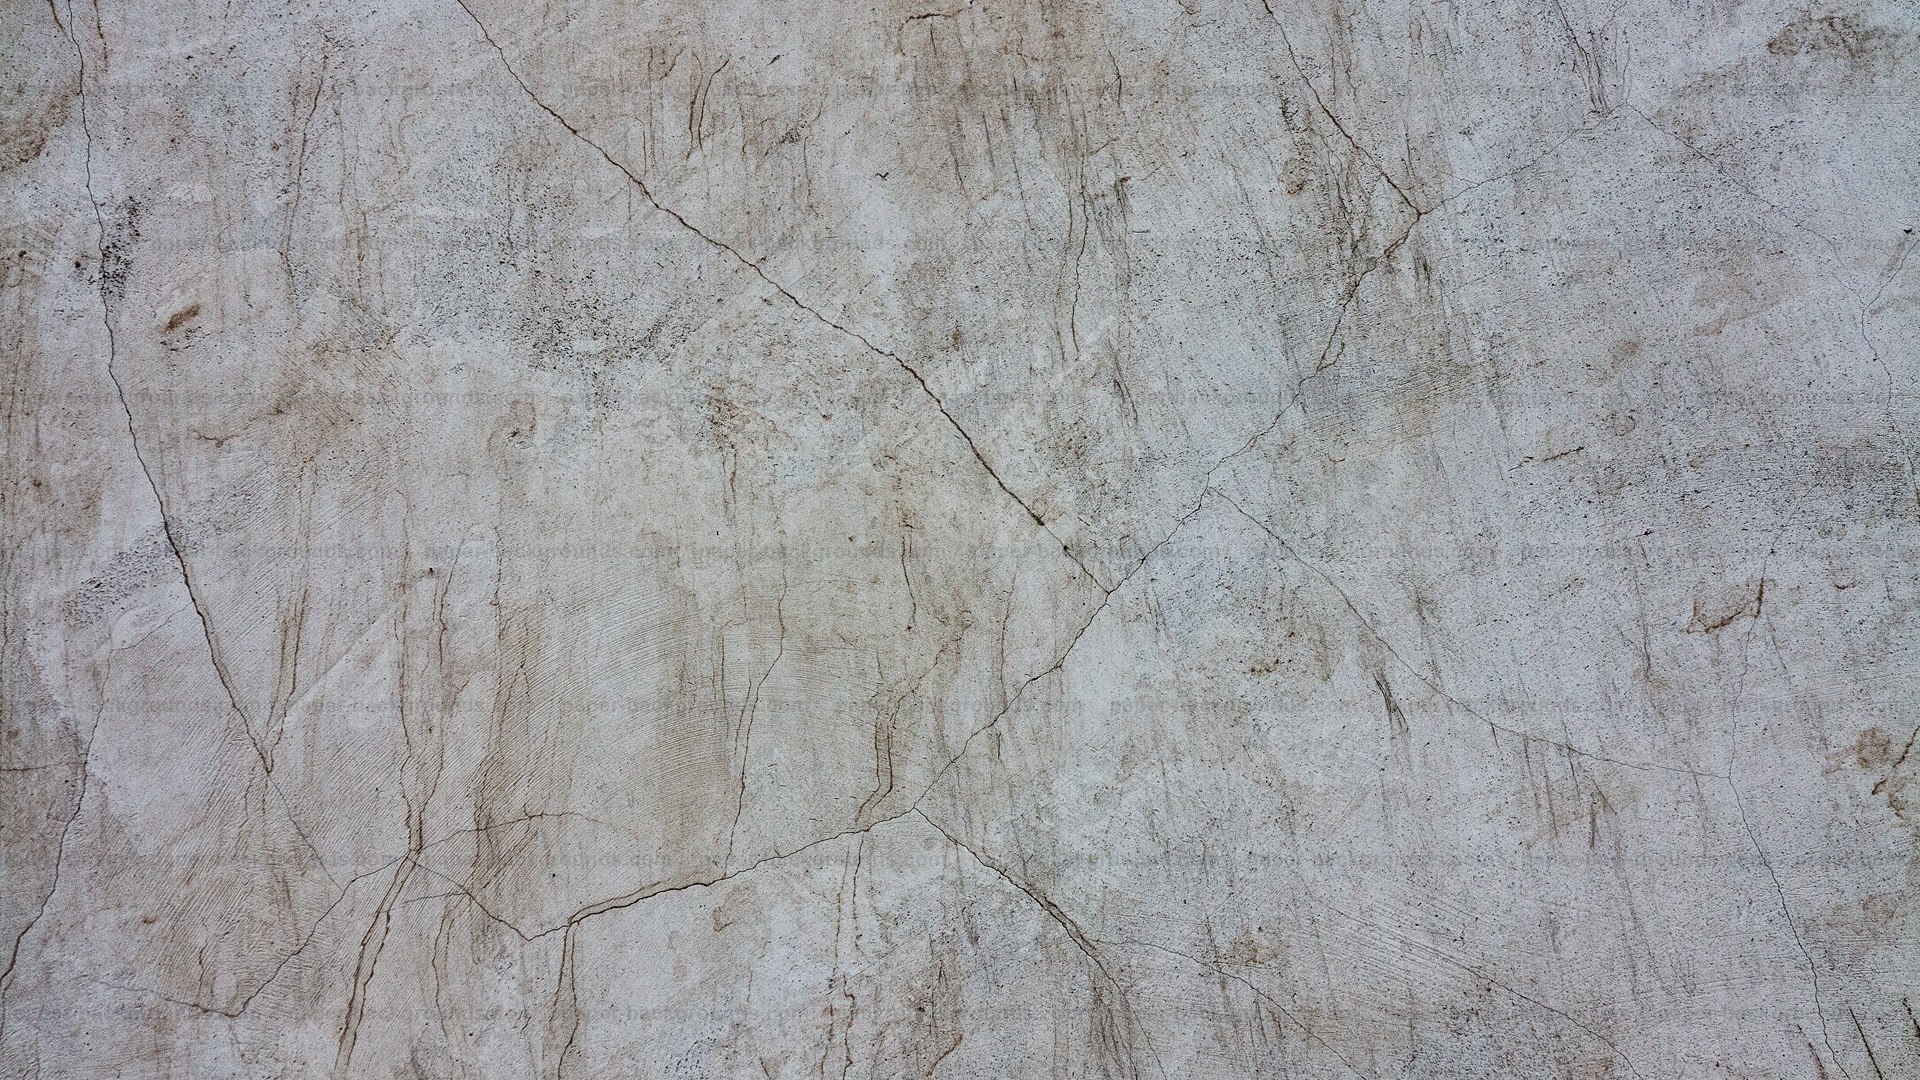 Cracked Dirty White Marble Wall Background HD X 1080p Picture